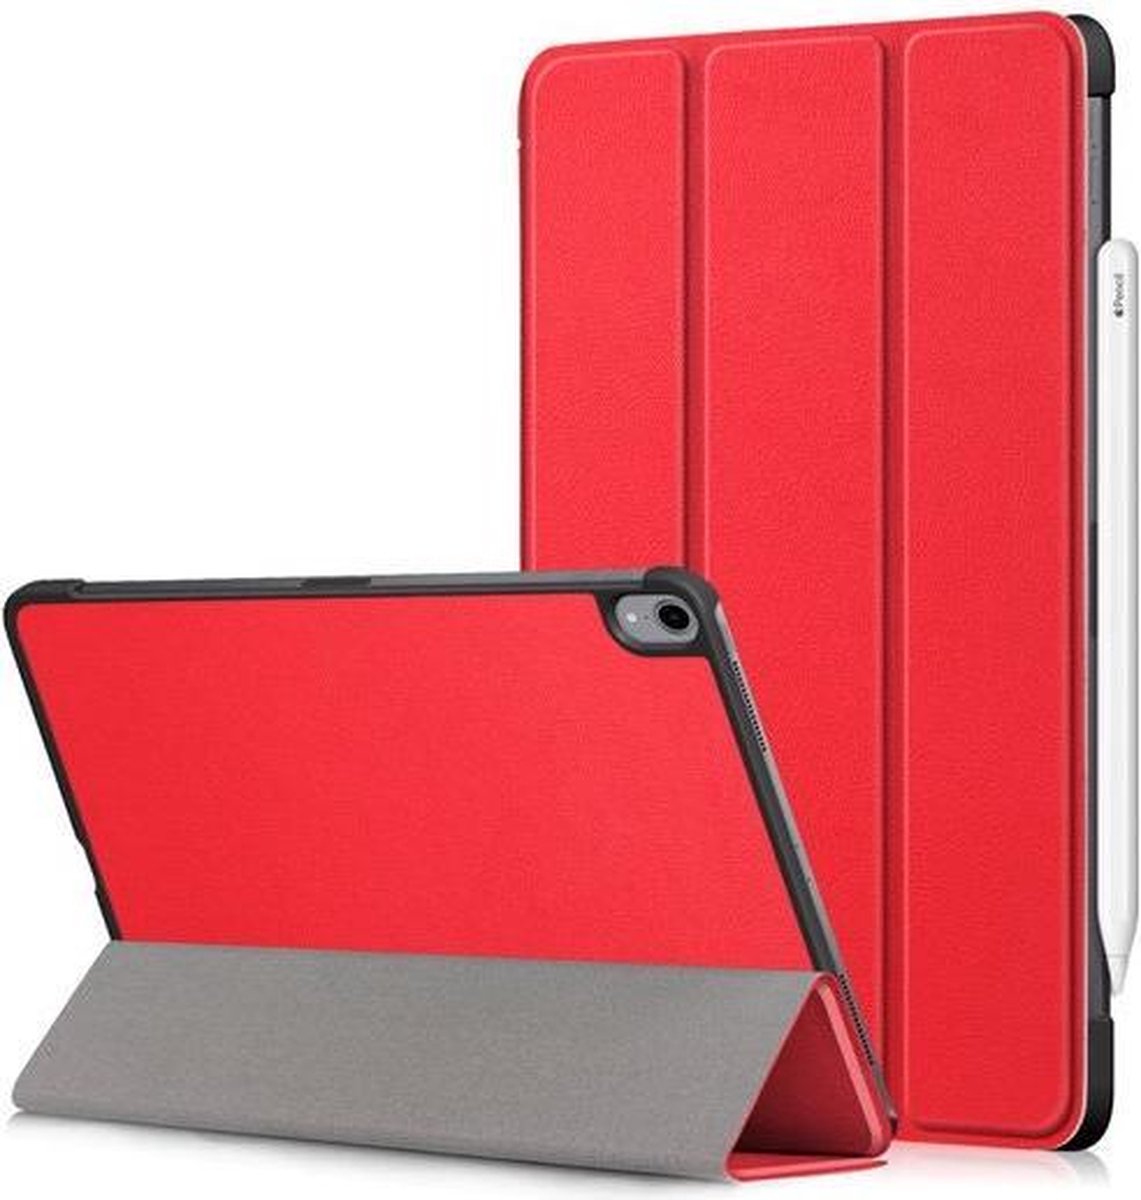 Tri-fold magnetische smart case hoes cover voor iPad Pro 11 (2018) - rood